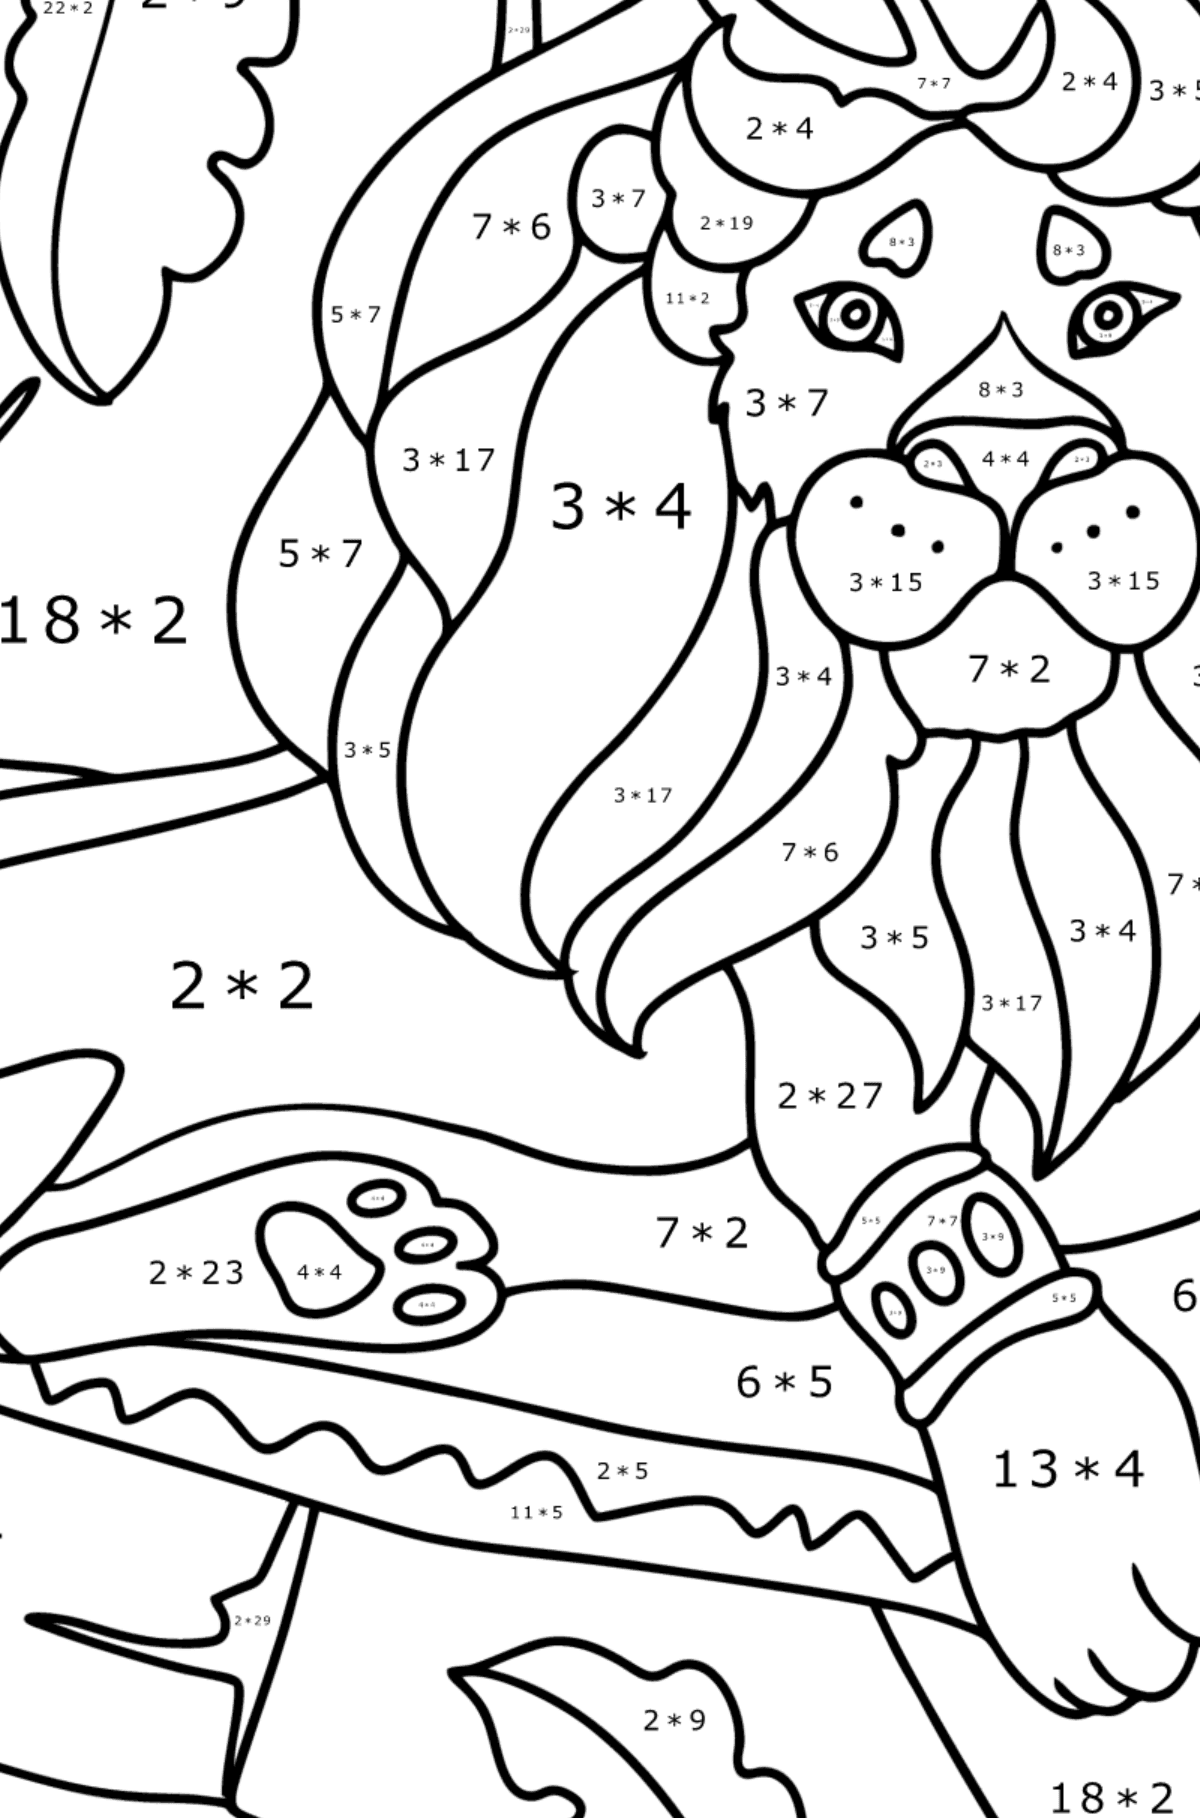 Beautiful lion - Lions coloring pages for Adults online and printable